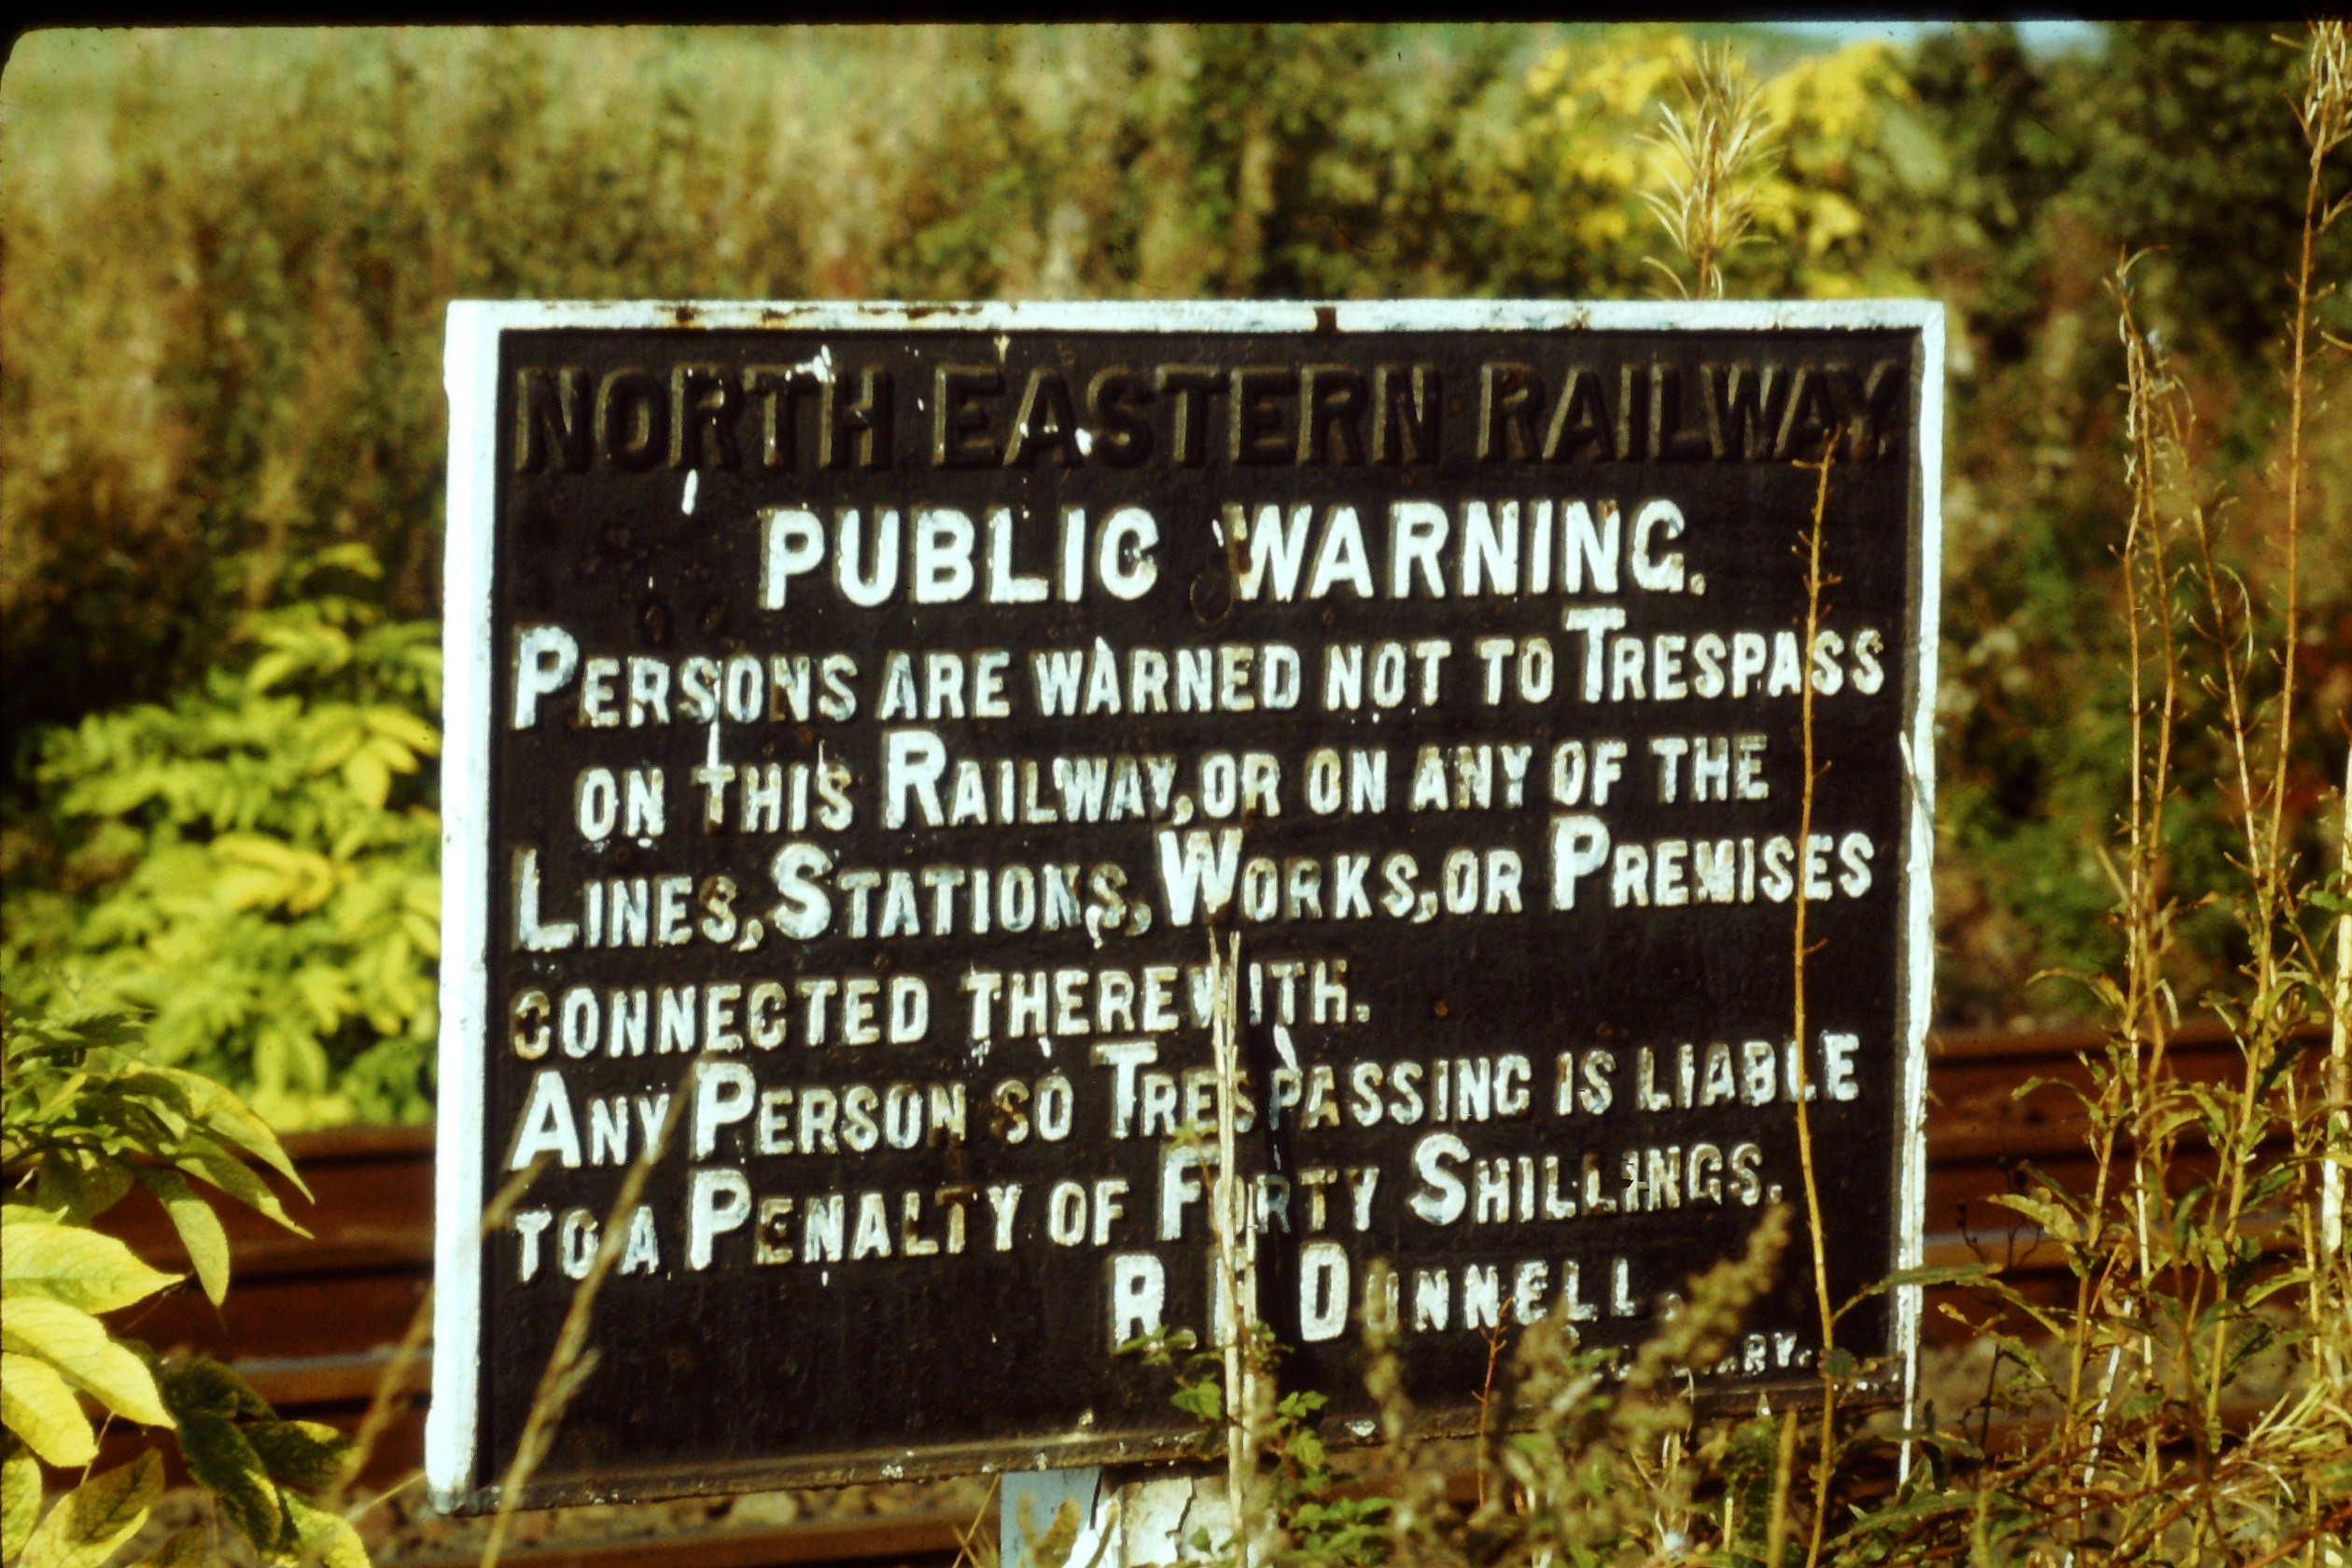 Trespass warning sign at Pelton. Photo Author's Collection